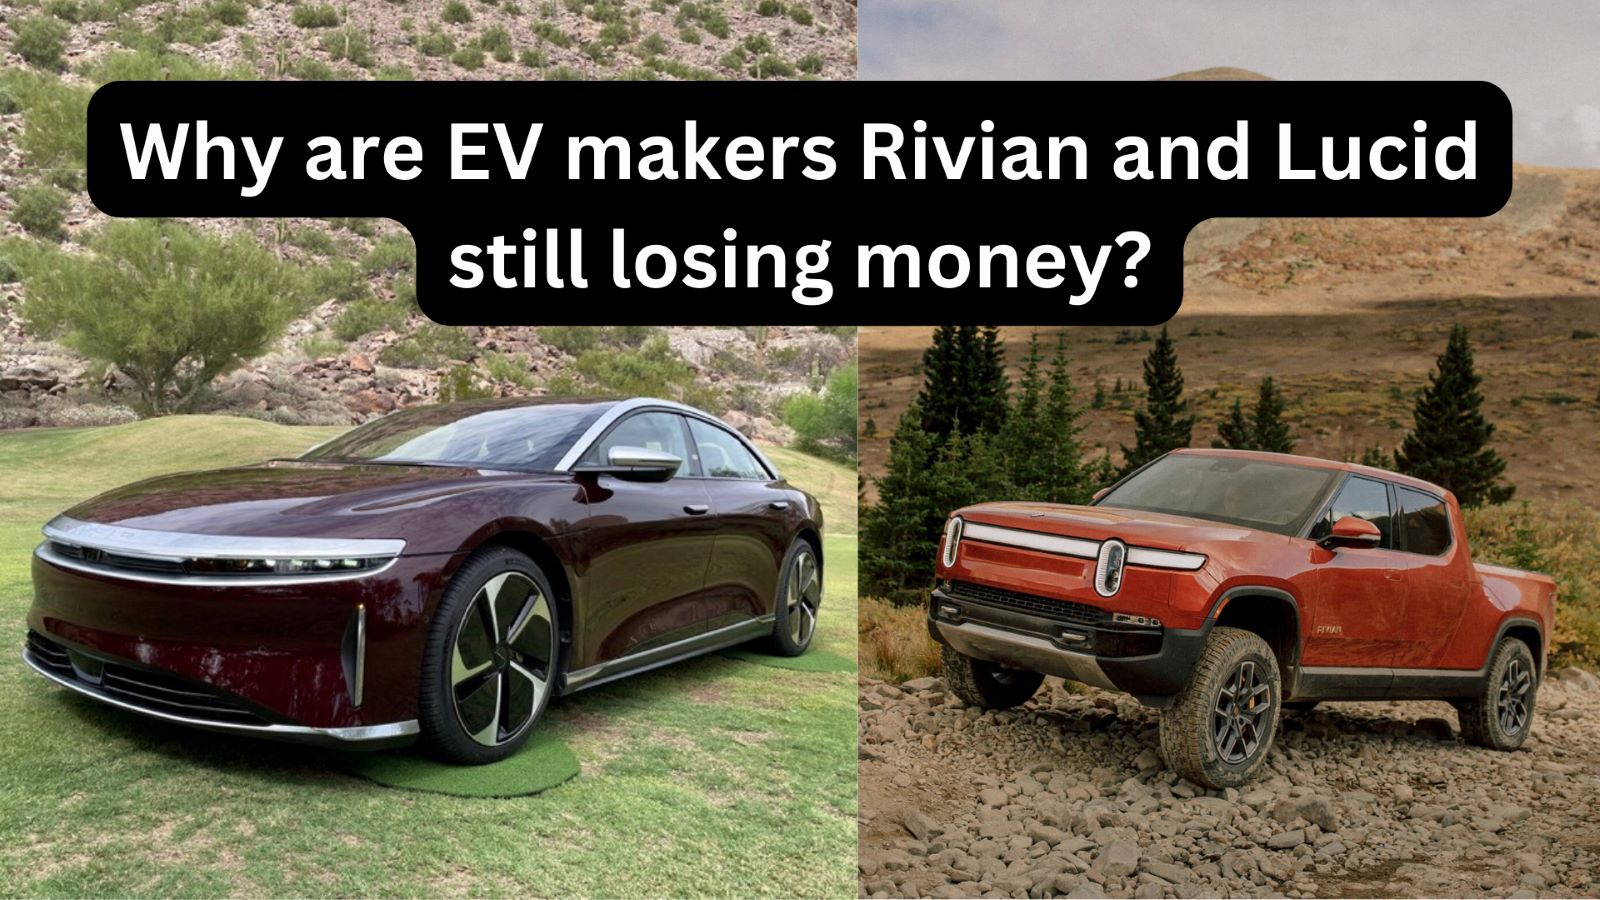 Why are EV makers Rivian and Lucid still losing money? Sunfortzone